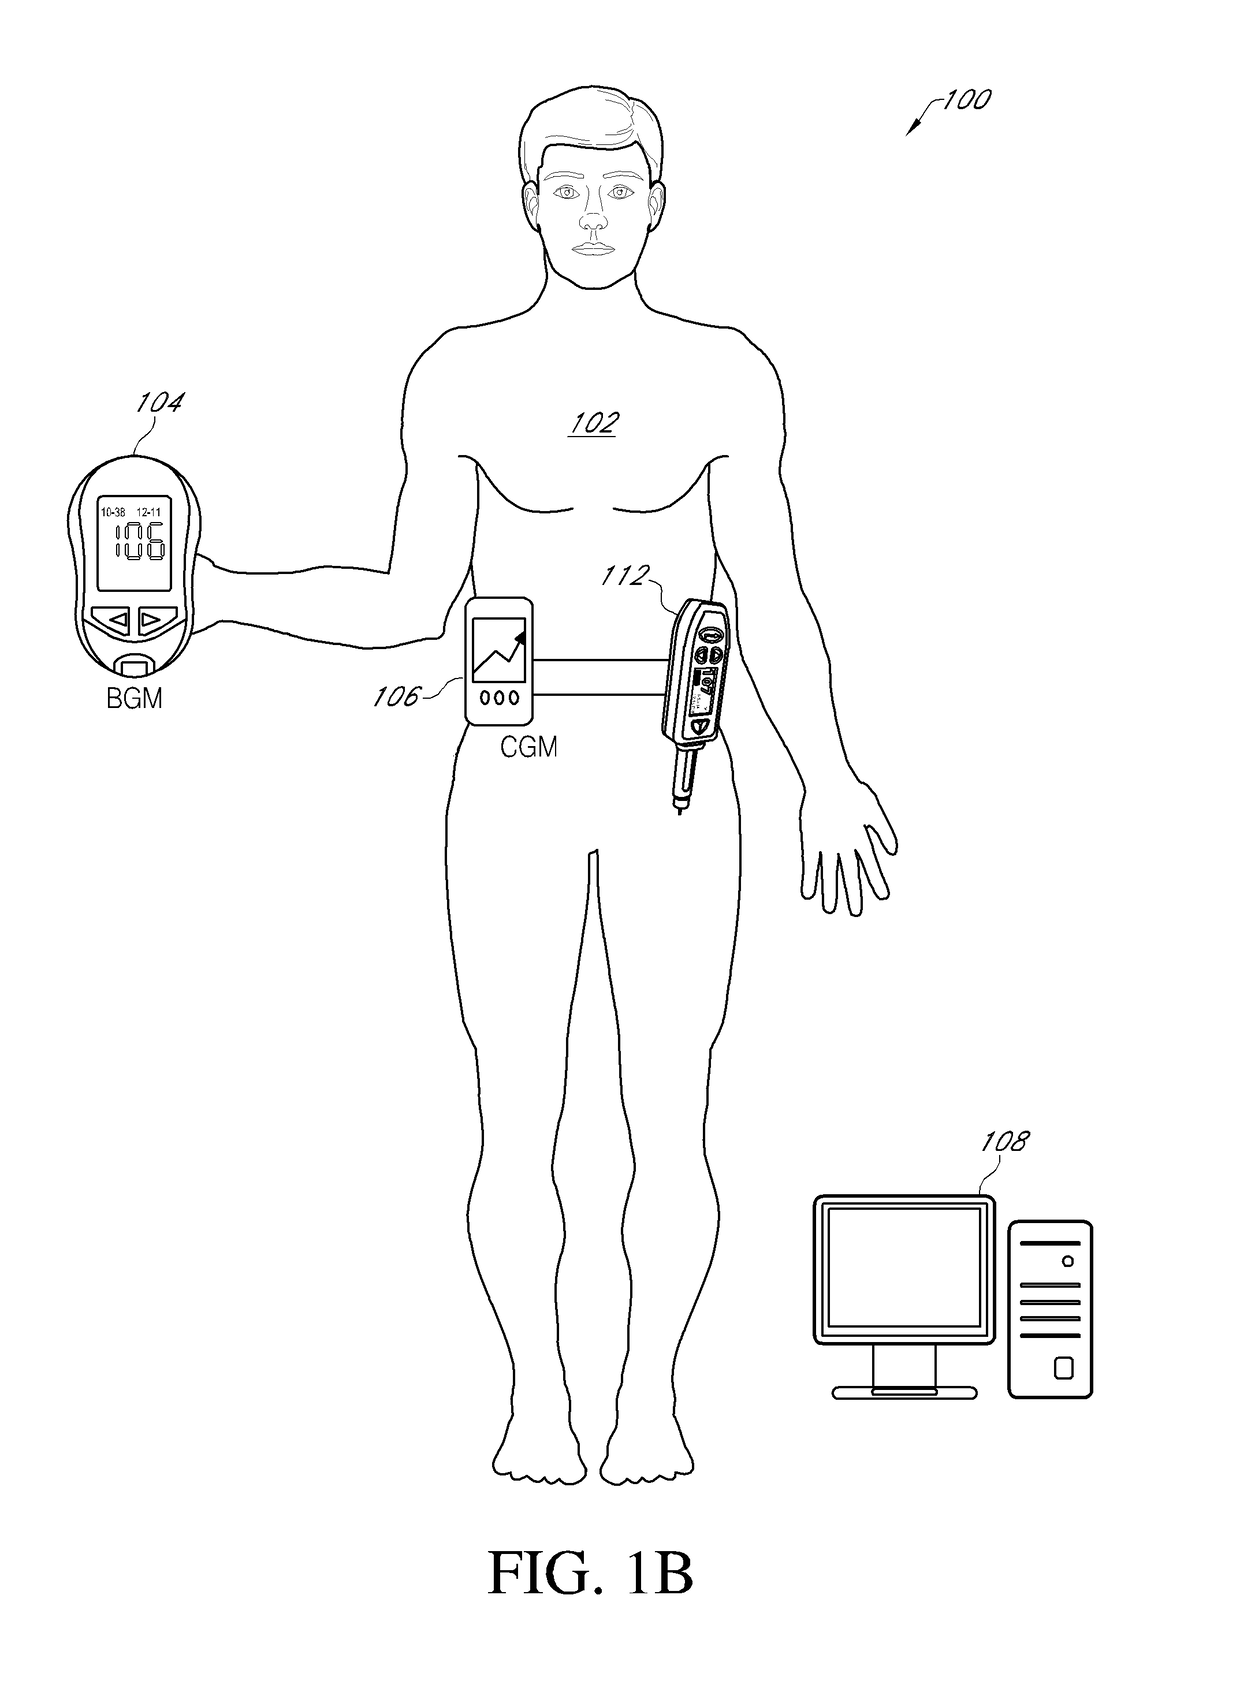 Continuous glucose monitoring injection device